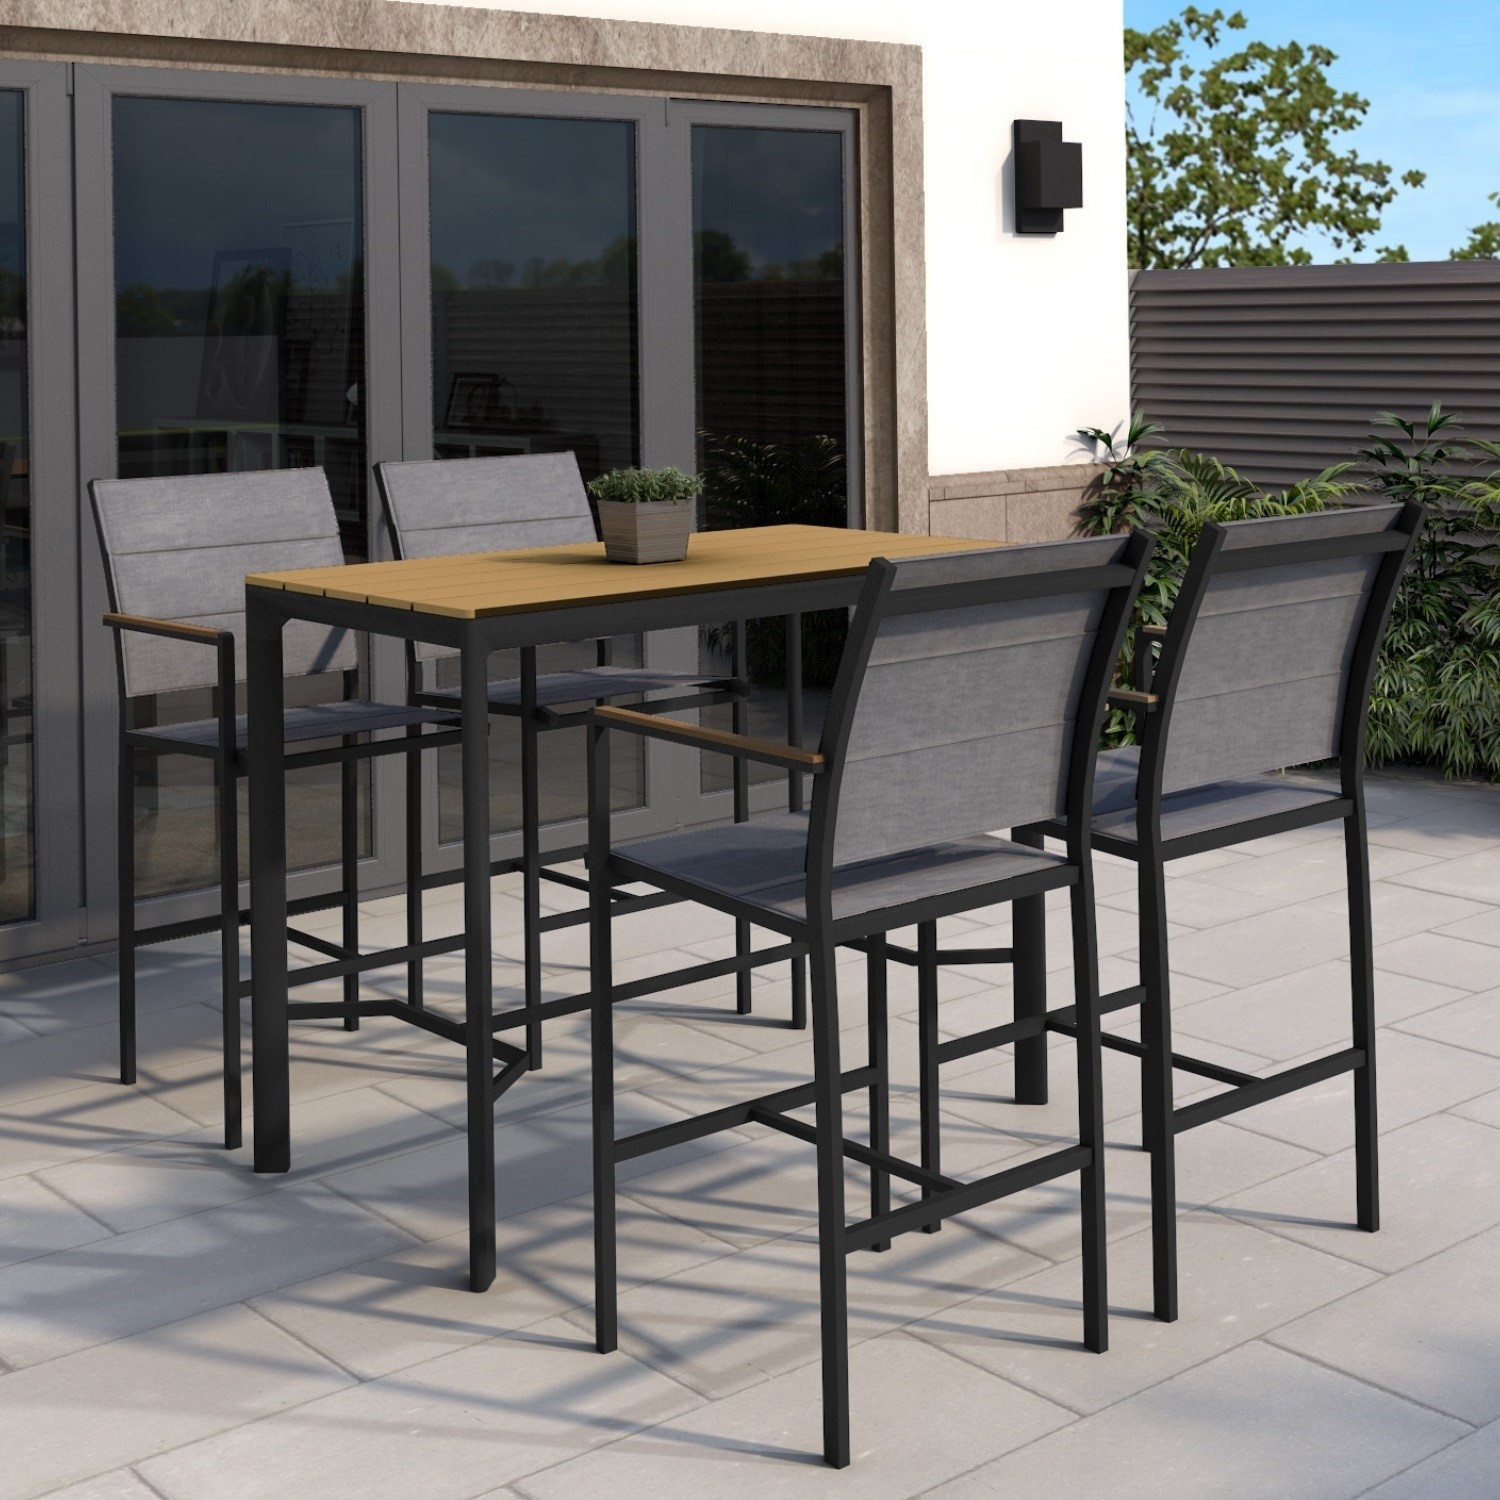 Black Outdoor Bar Set With 4 Stools, Outdoor High Bar Table And Stools Uk